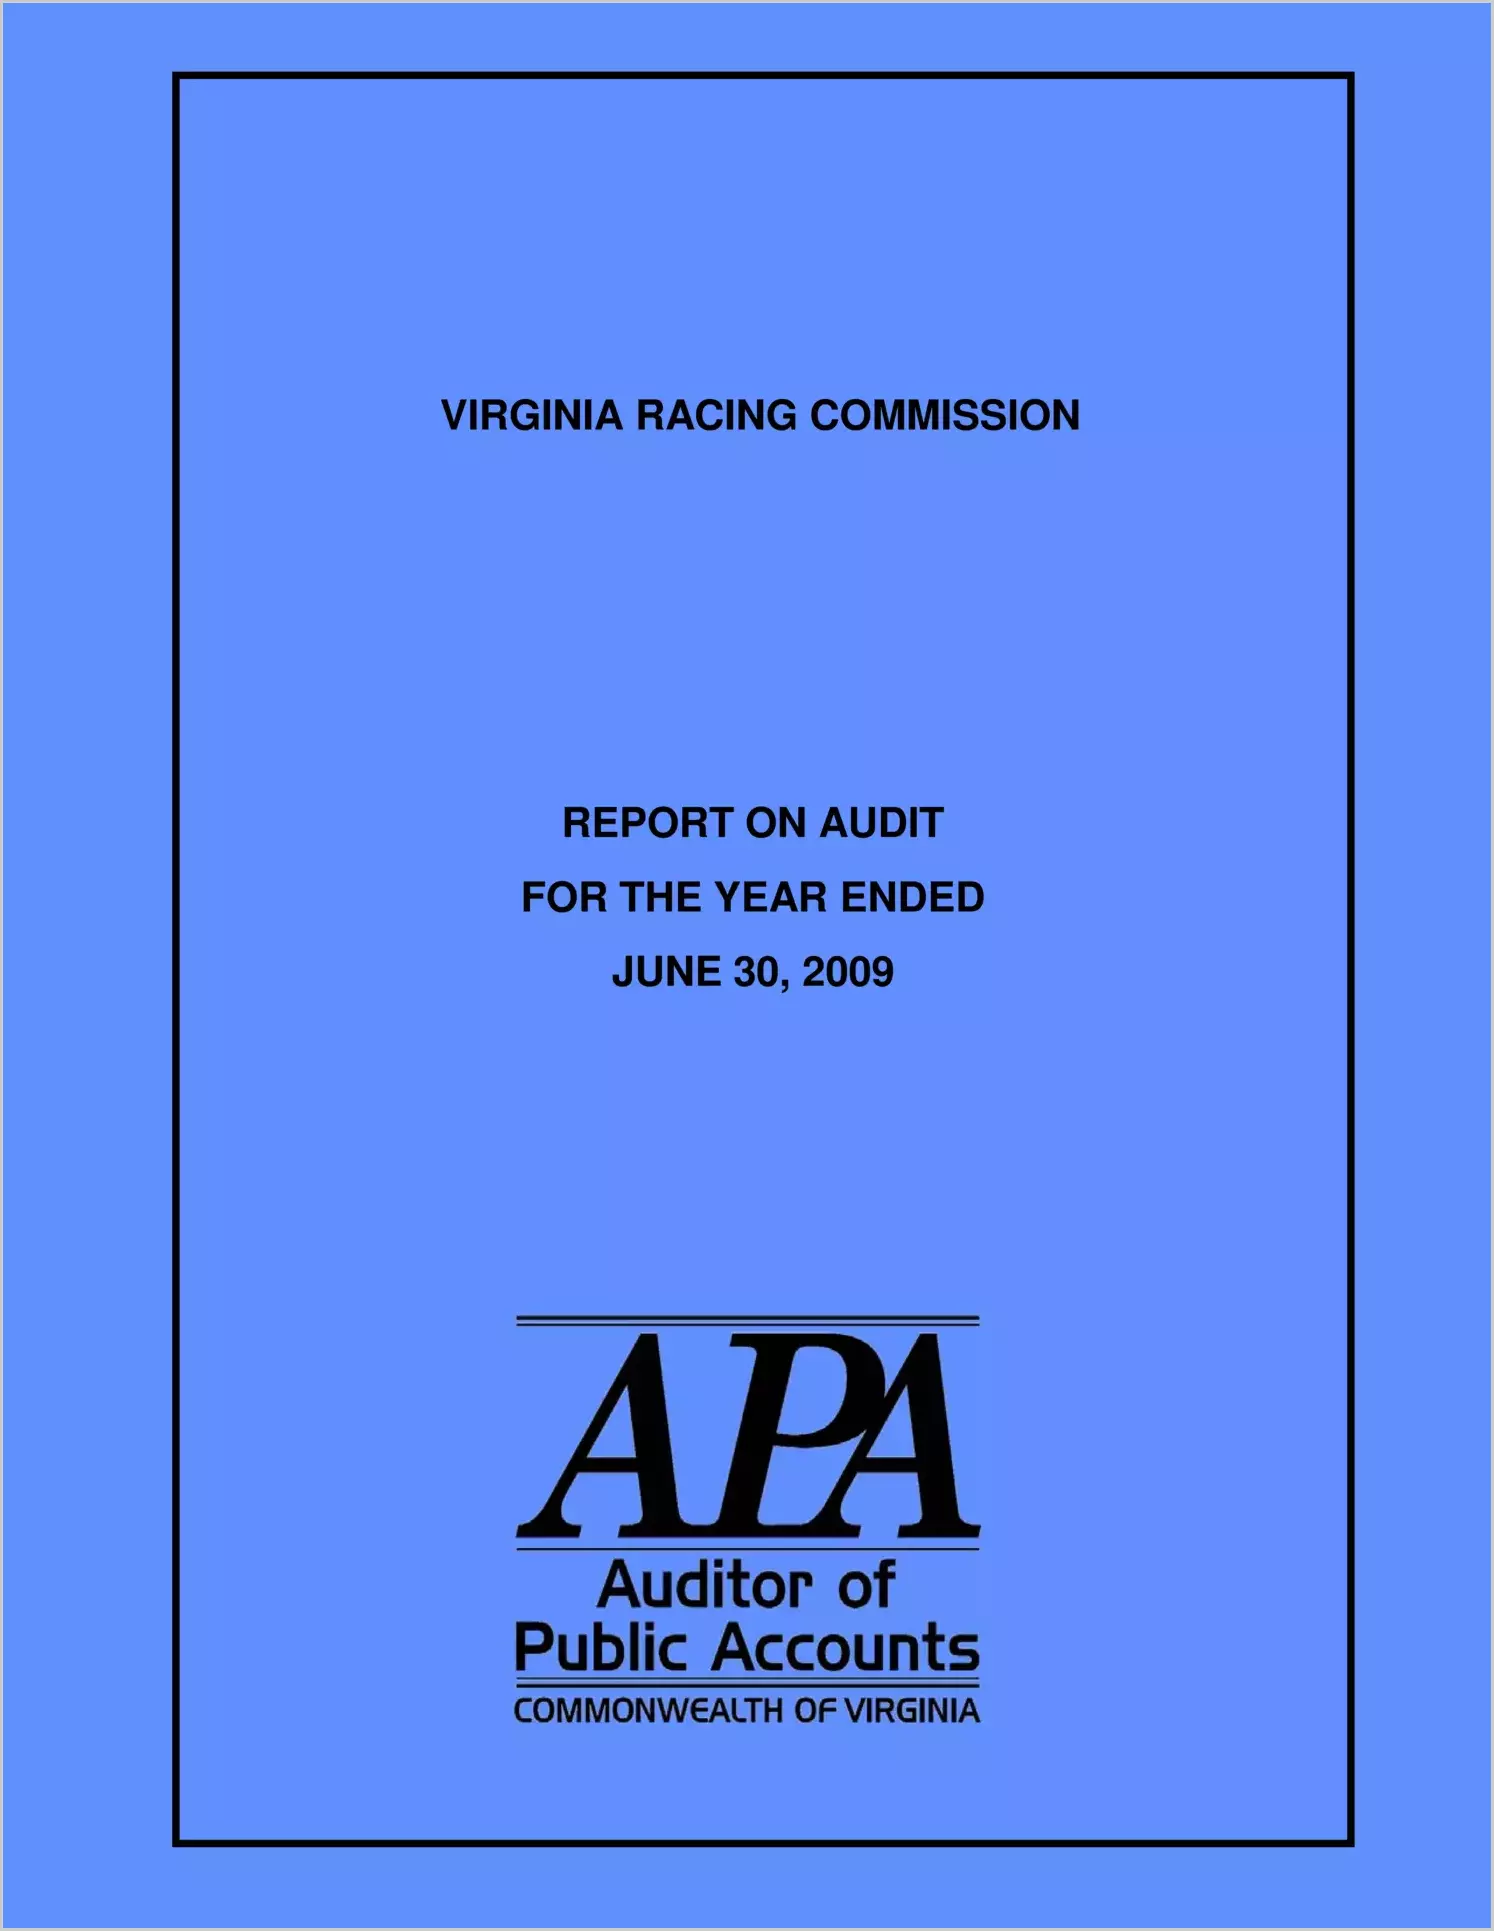 Virginia Racing Commission for the year ended June 30, 2009